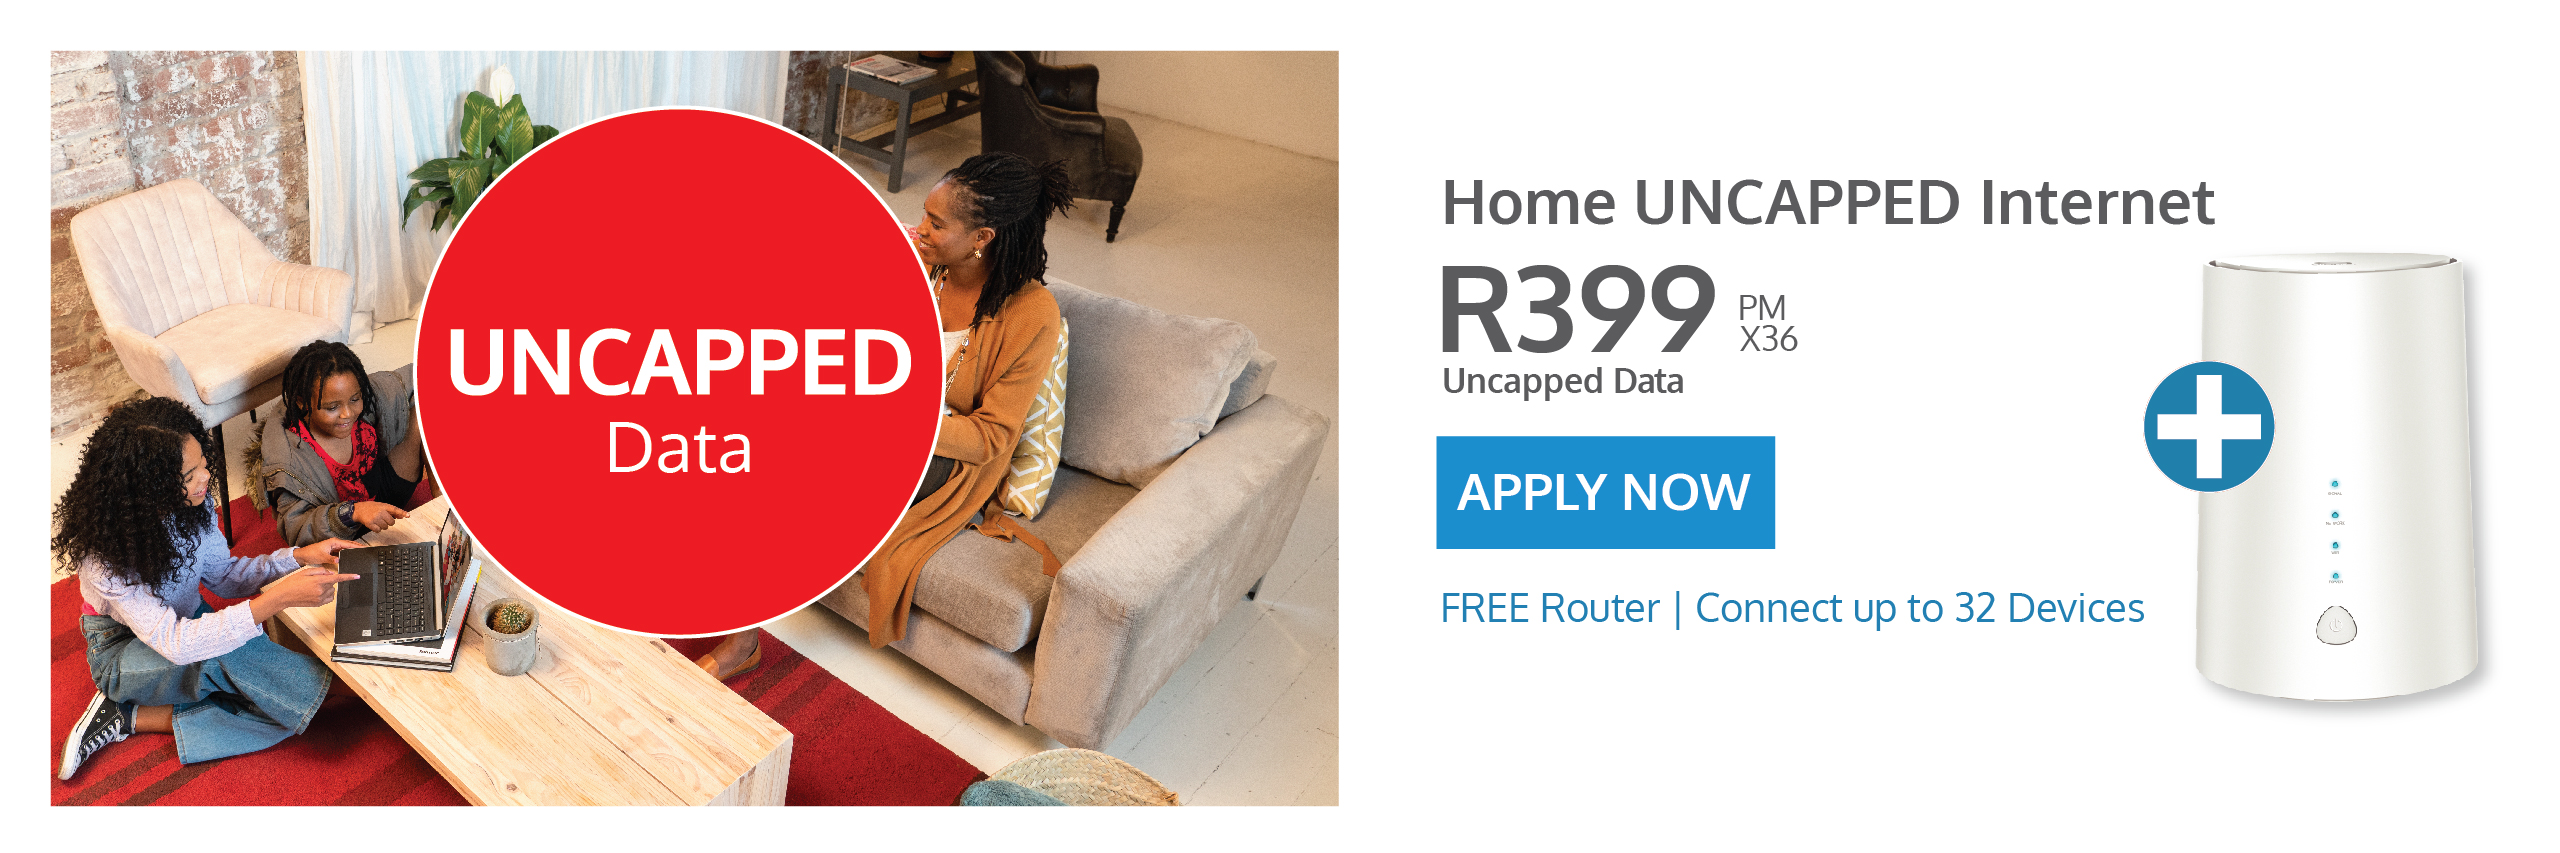 Home uncapped internet contract deal